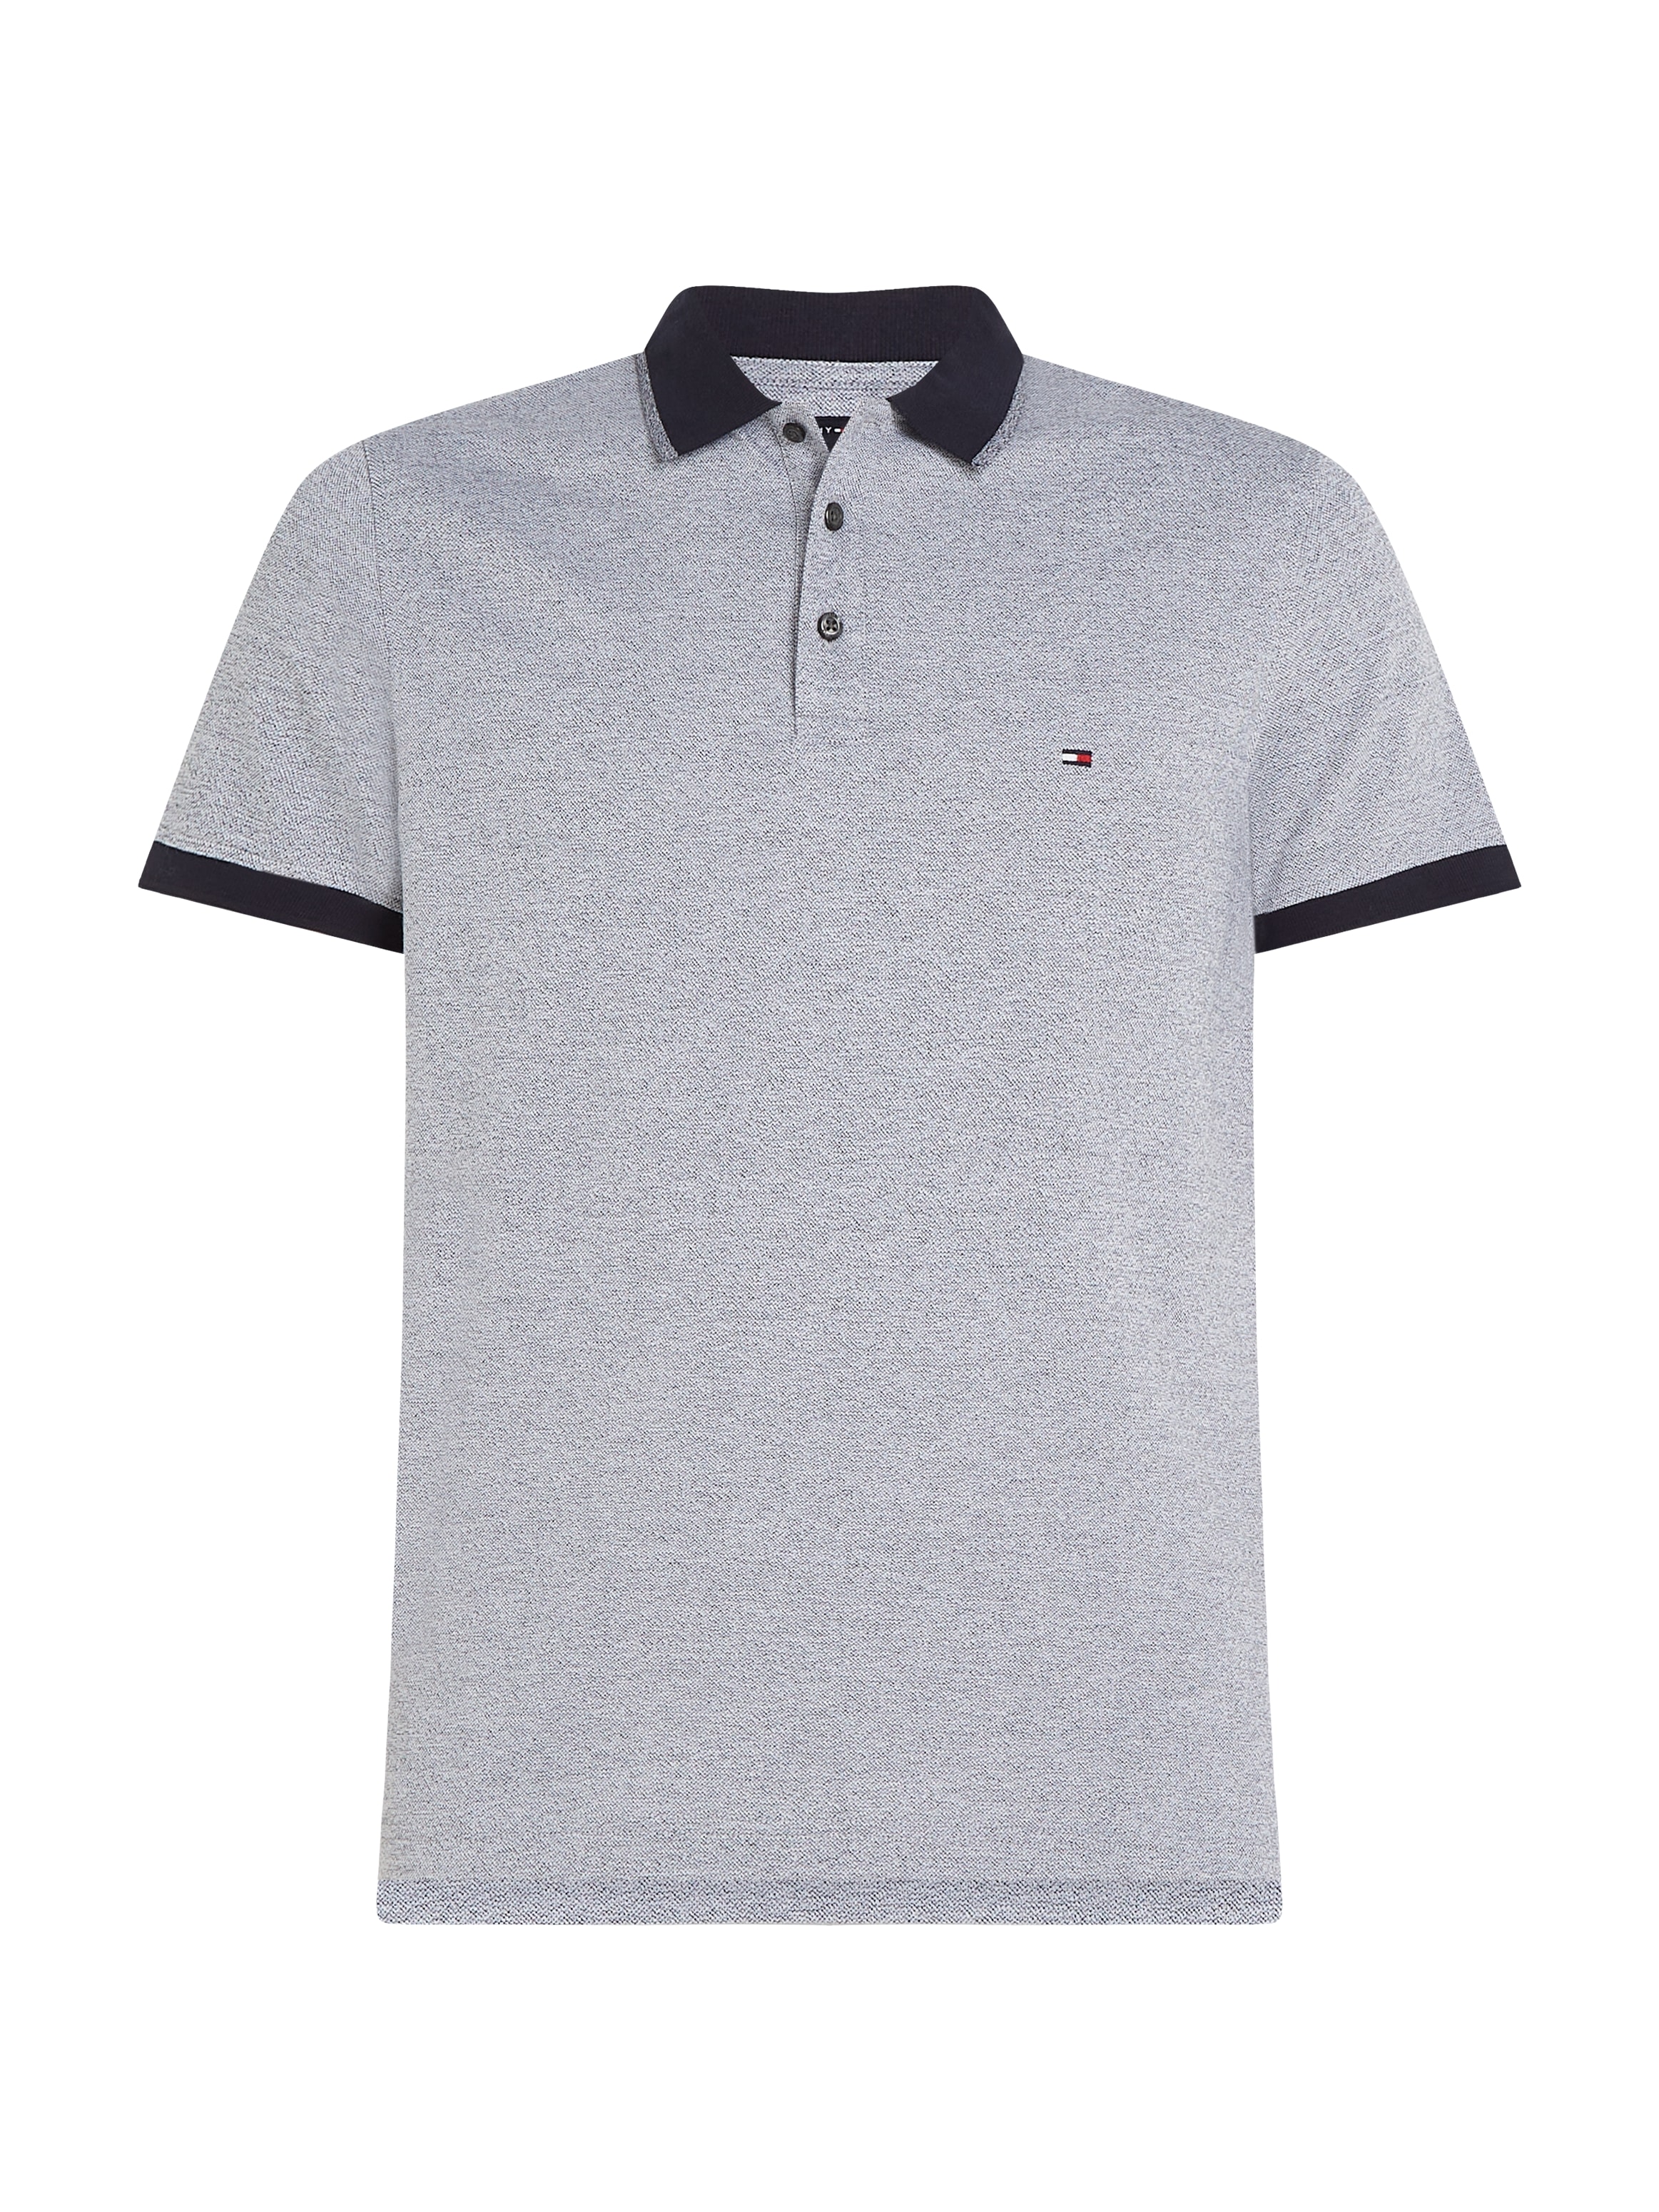 Tommy Hilfiger OTTO SLIM bei Poloshirt kaufen online »MOULINE TIPPED POLO«